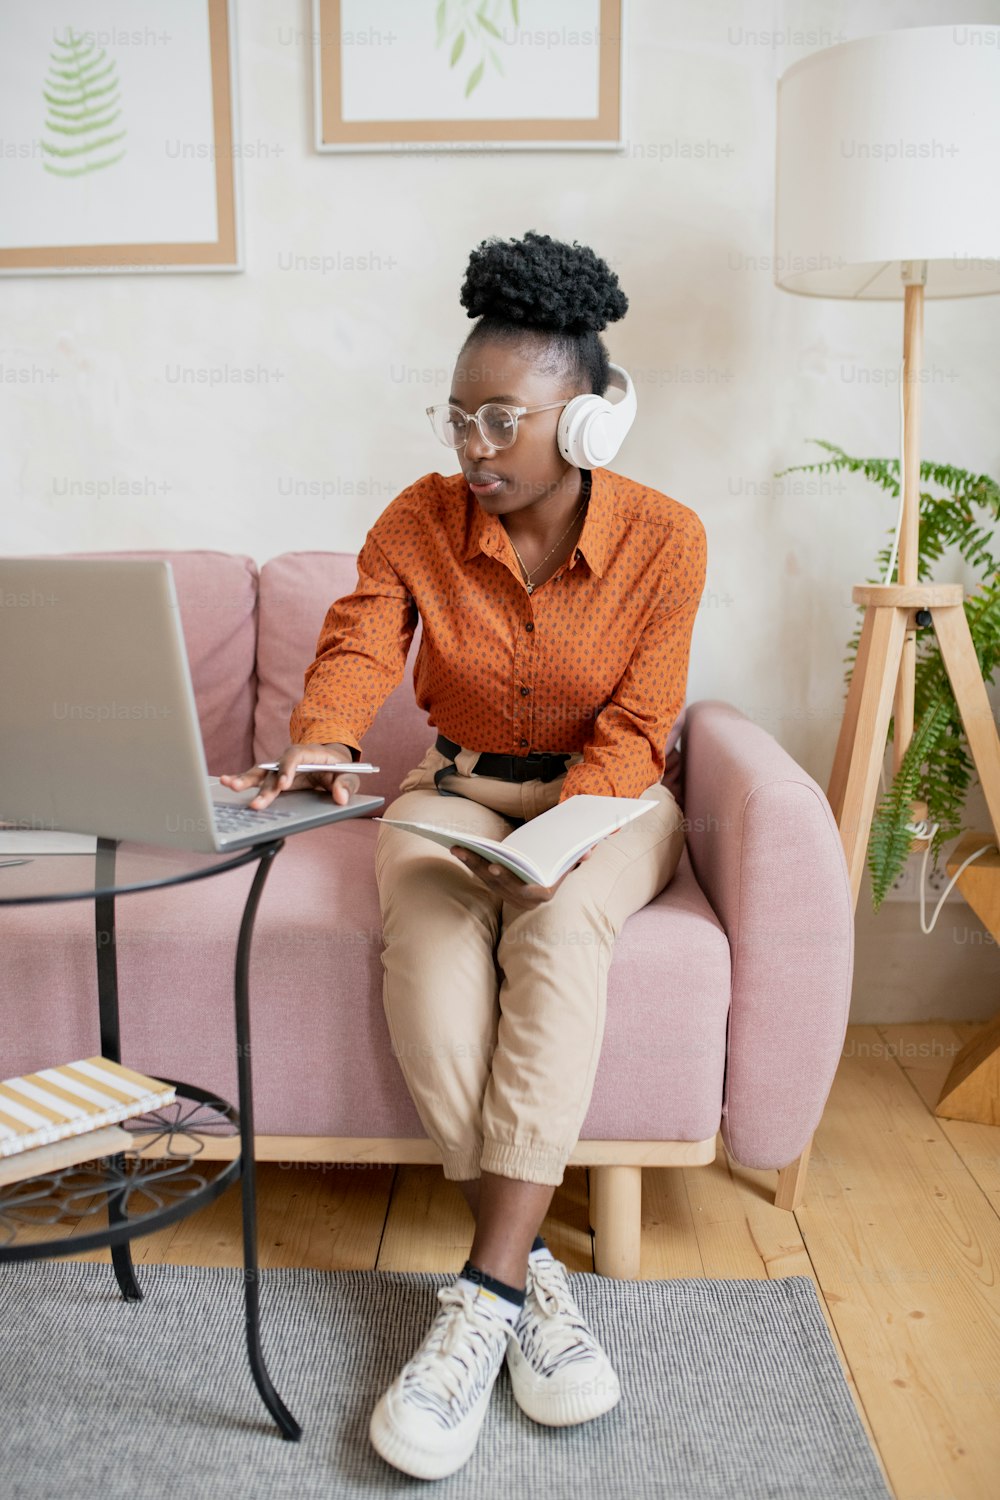 African female student in headphones looking at laptop screen while sitting on couch in home environment during online lesson